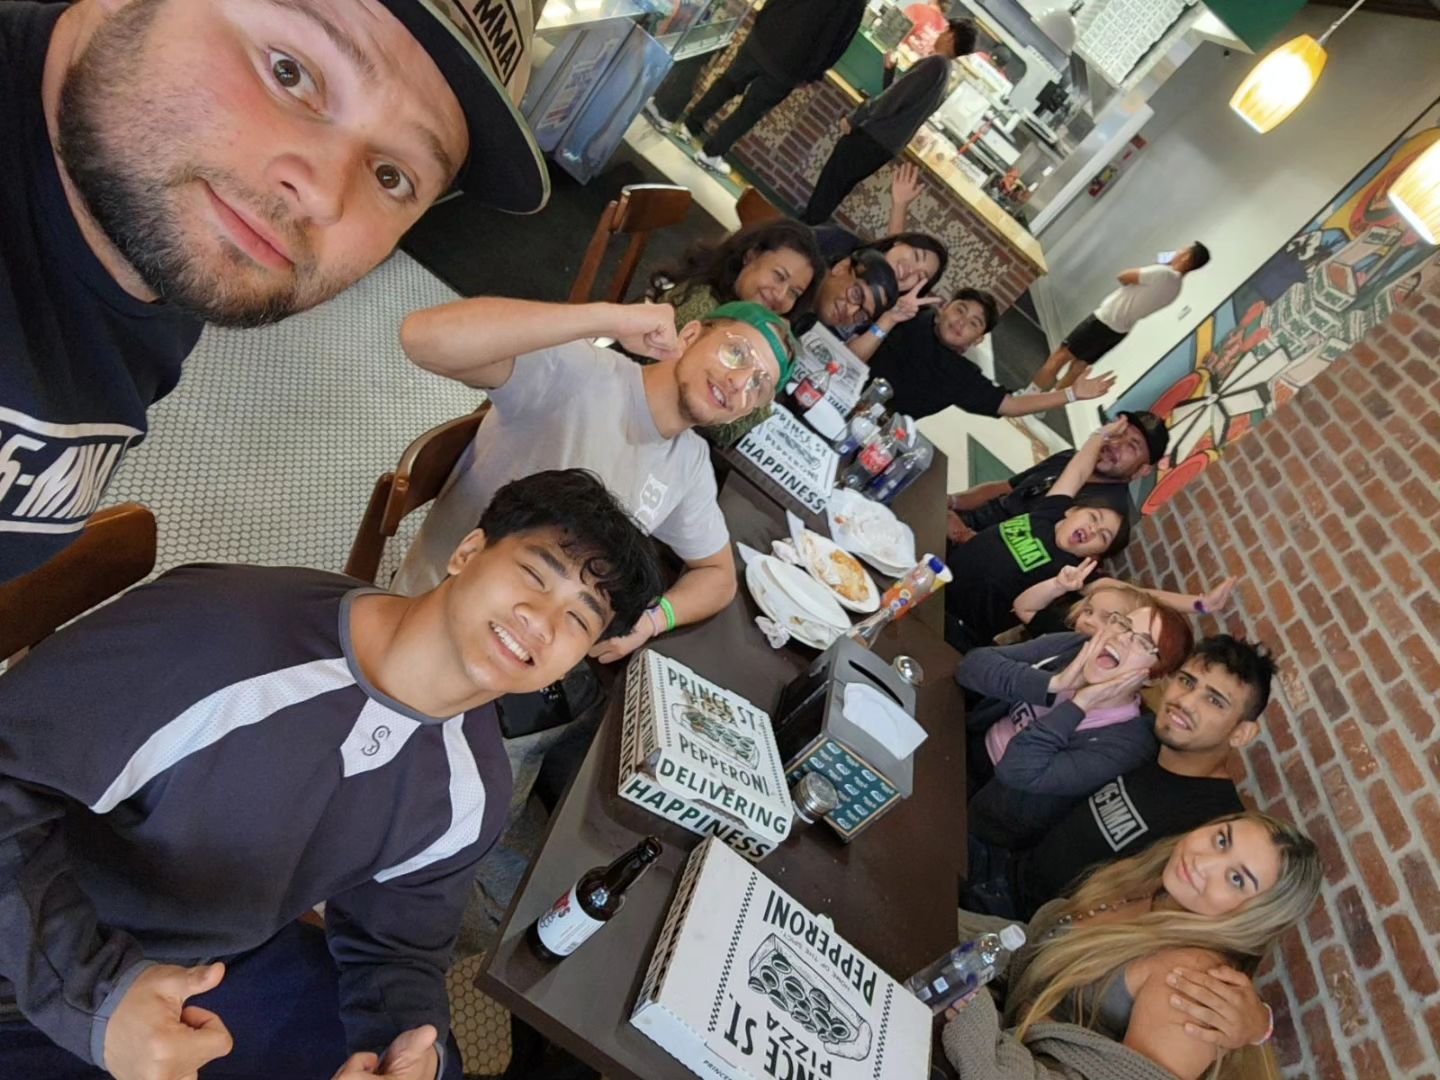 We came, we conquered, and we got pizza 🍕 A Saturday well spent 💙 Thank you to everyone who came and watched our boys put on a show, can't wait for the next one! #gymfamily #805mma